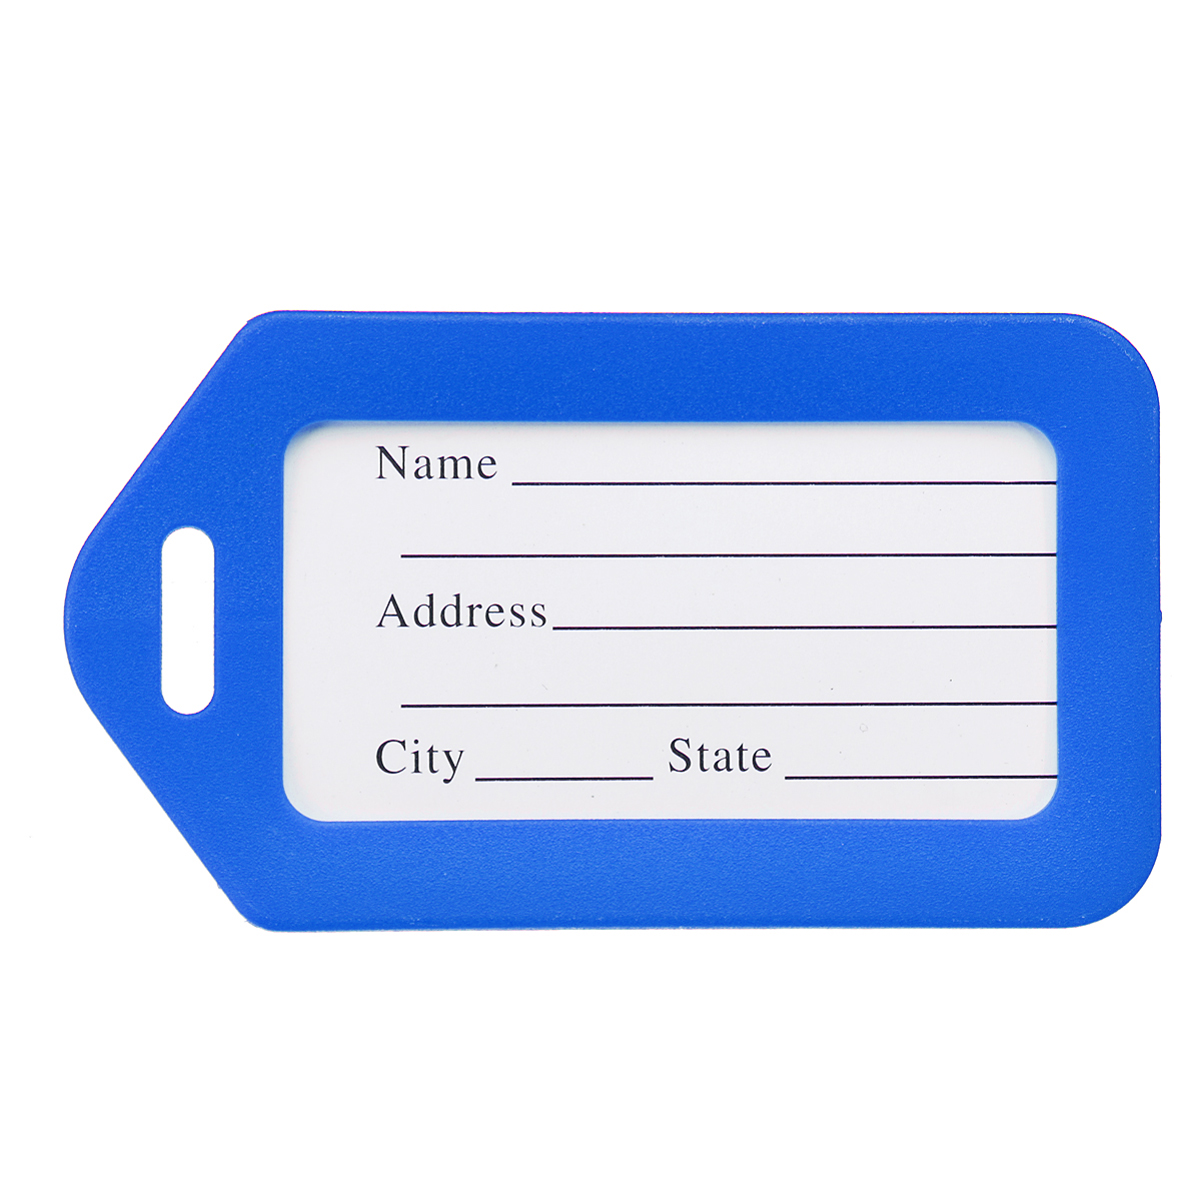 10-Pcs-Luggage-Bag-Tag-Name-Address-ID-Label-Plastic-Travel-Bag-Tags-for-Suitcase-Bag-1714336-6